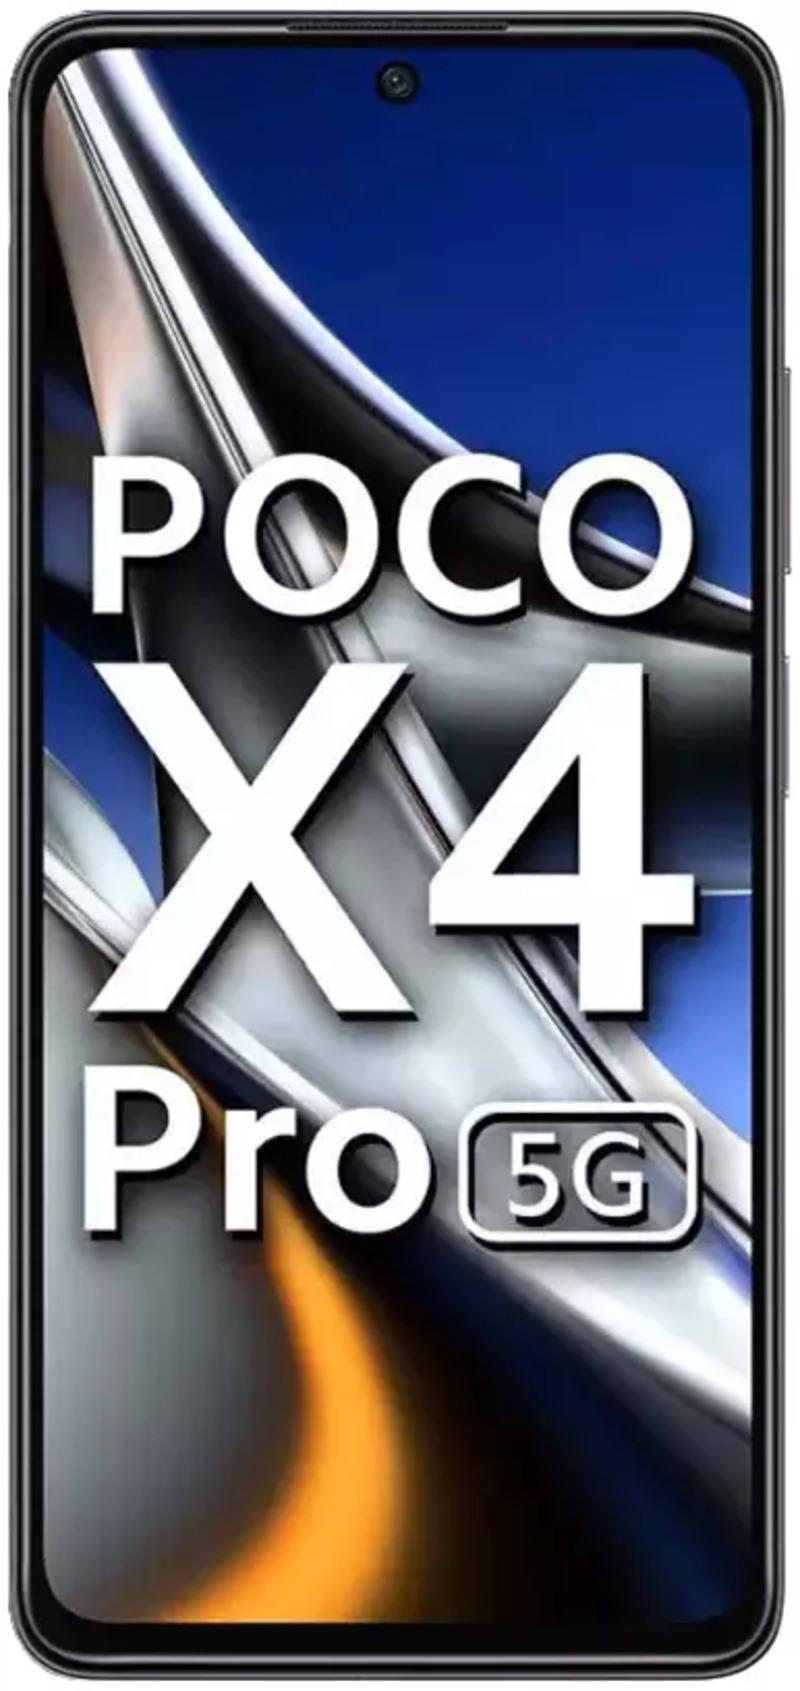 Poco X4 Pro 5G featured in promo video for India with 64 MP camera